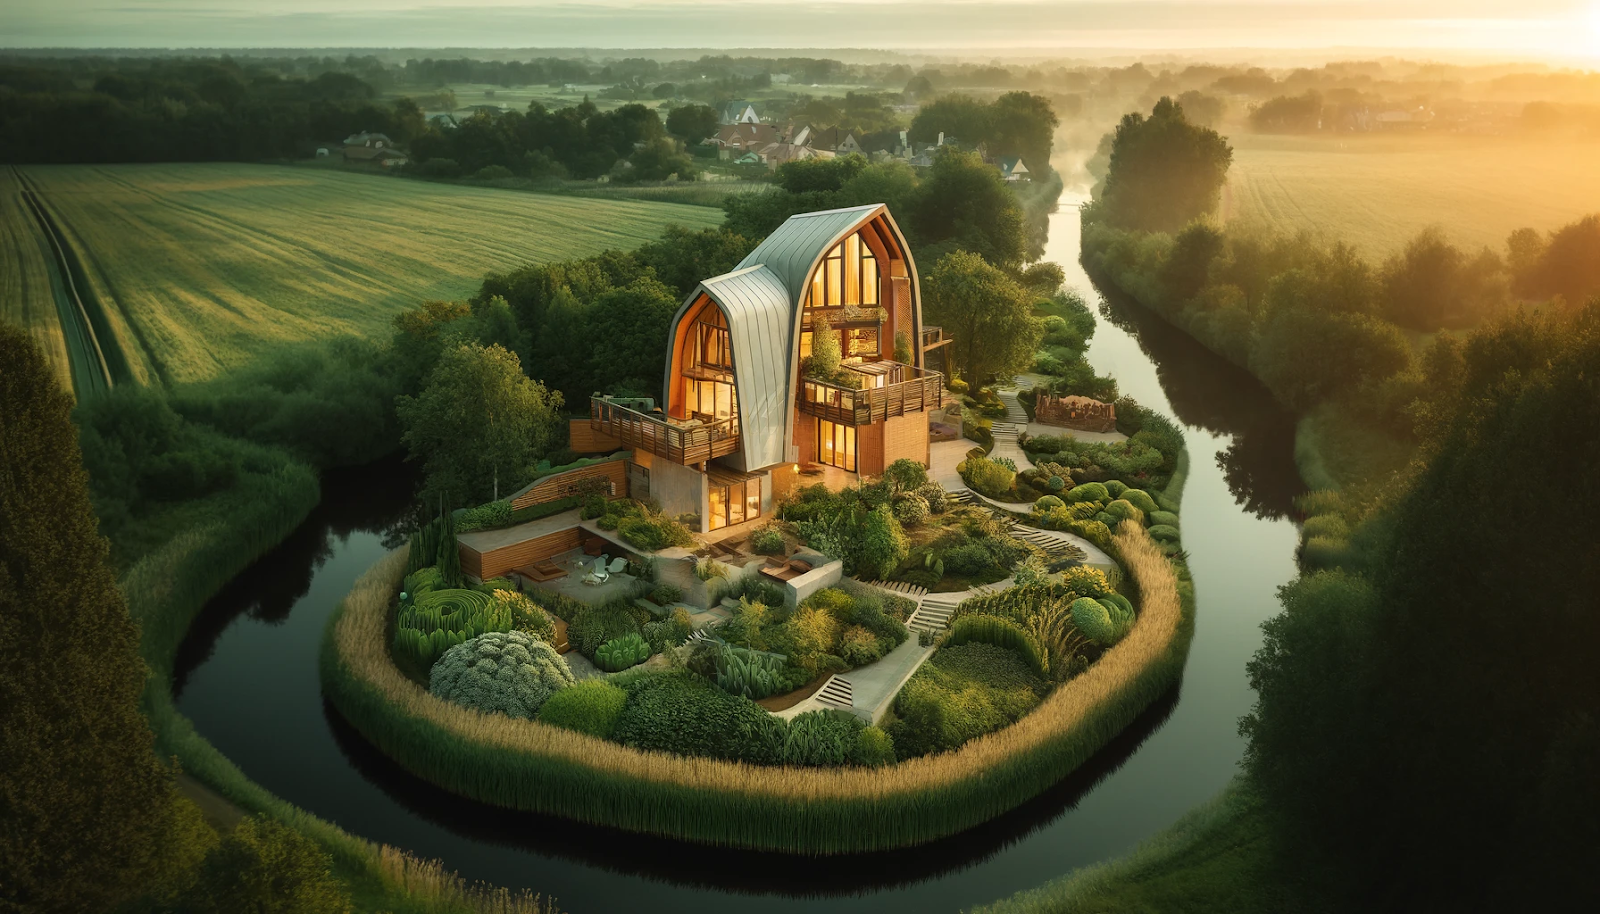 Futuristic house on a plot washed by a river